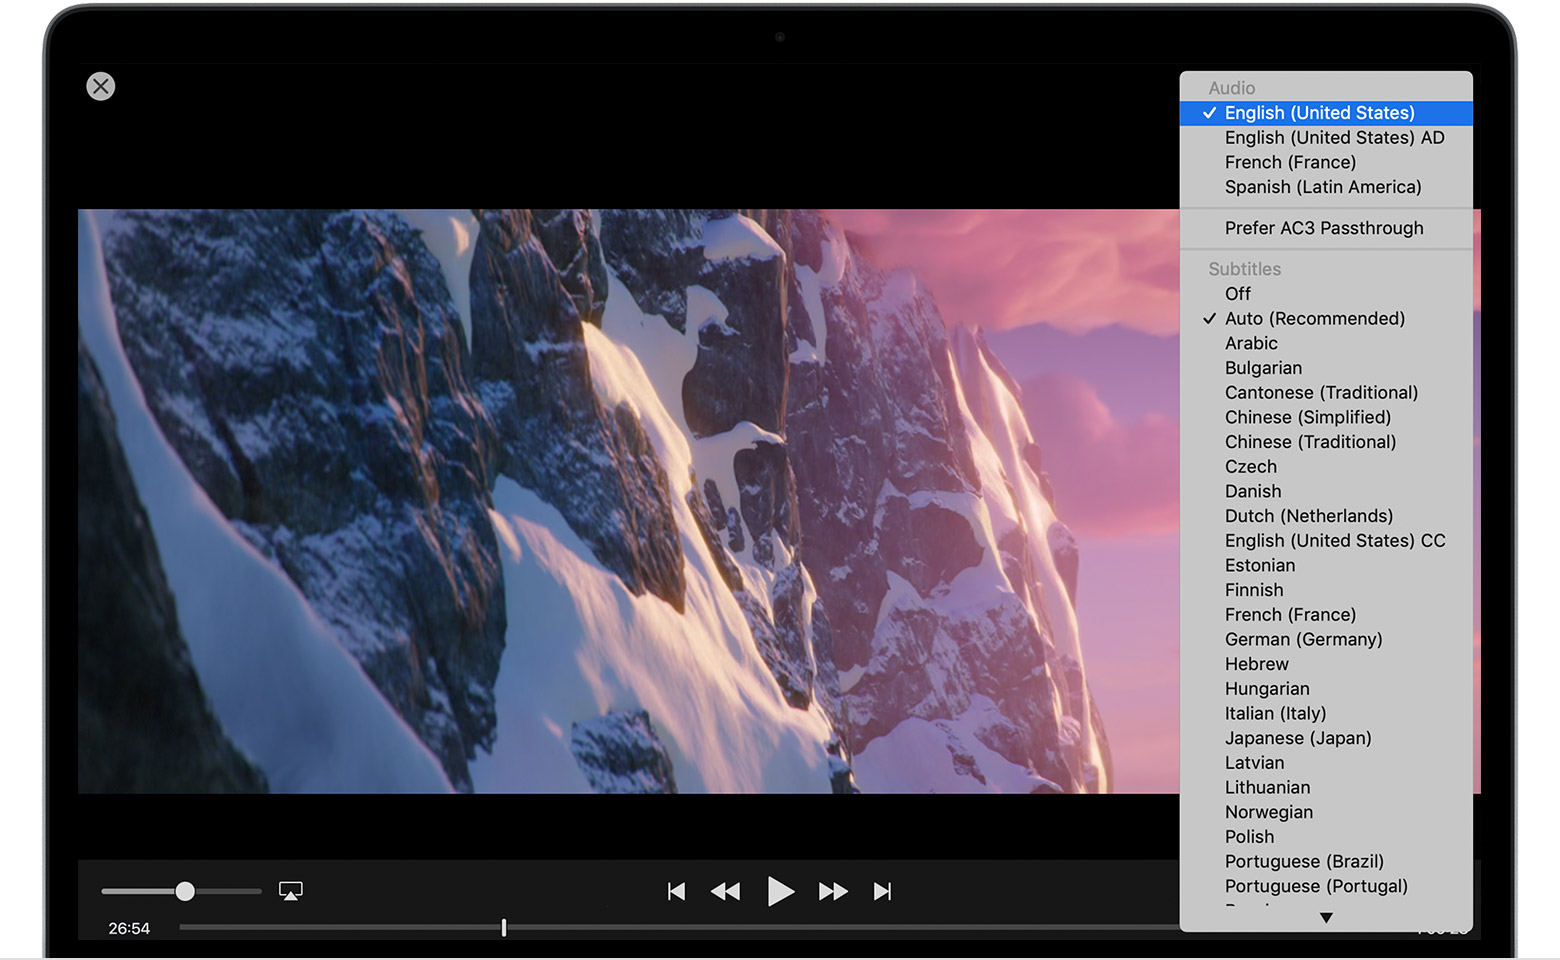 turn off subtitles in mplayer osx extended